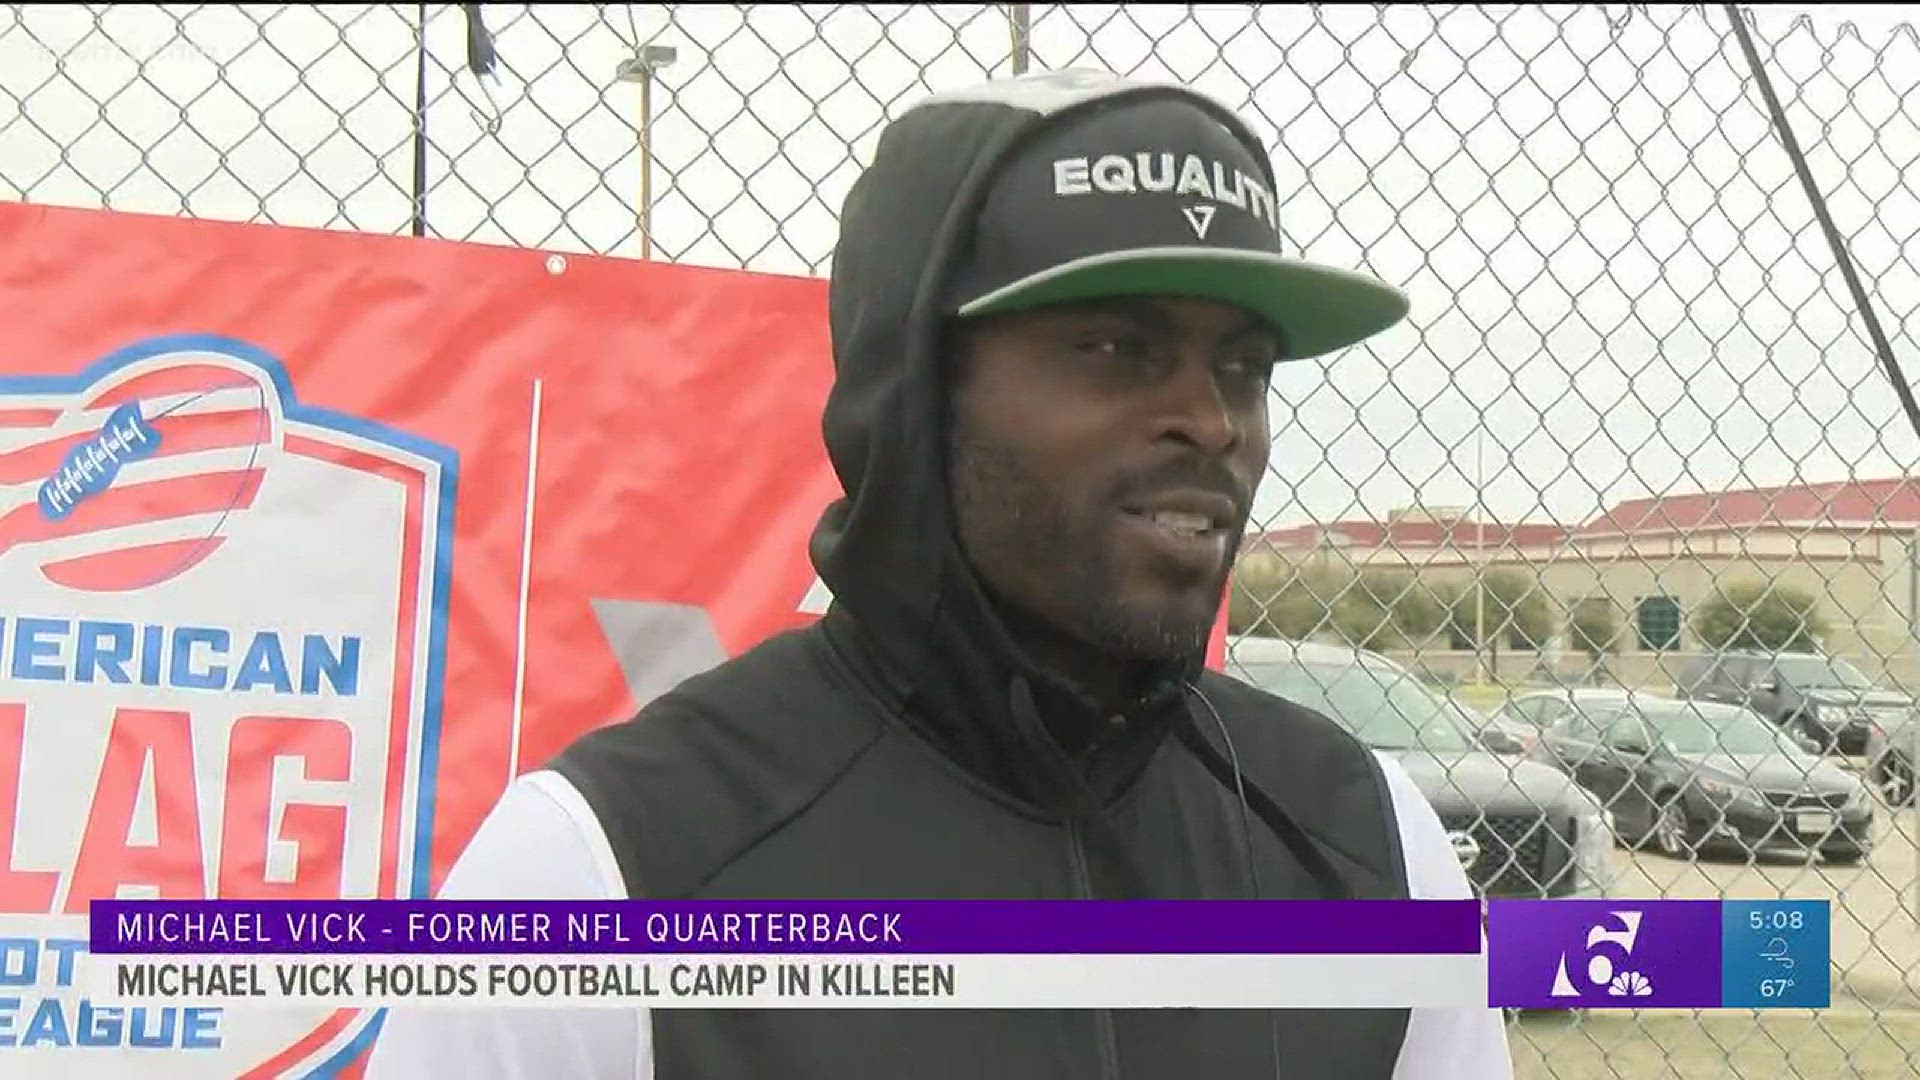 100 young football players in Killeen had the chance of a lifetime.